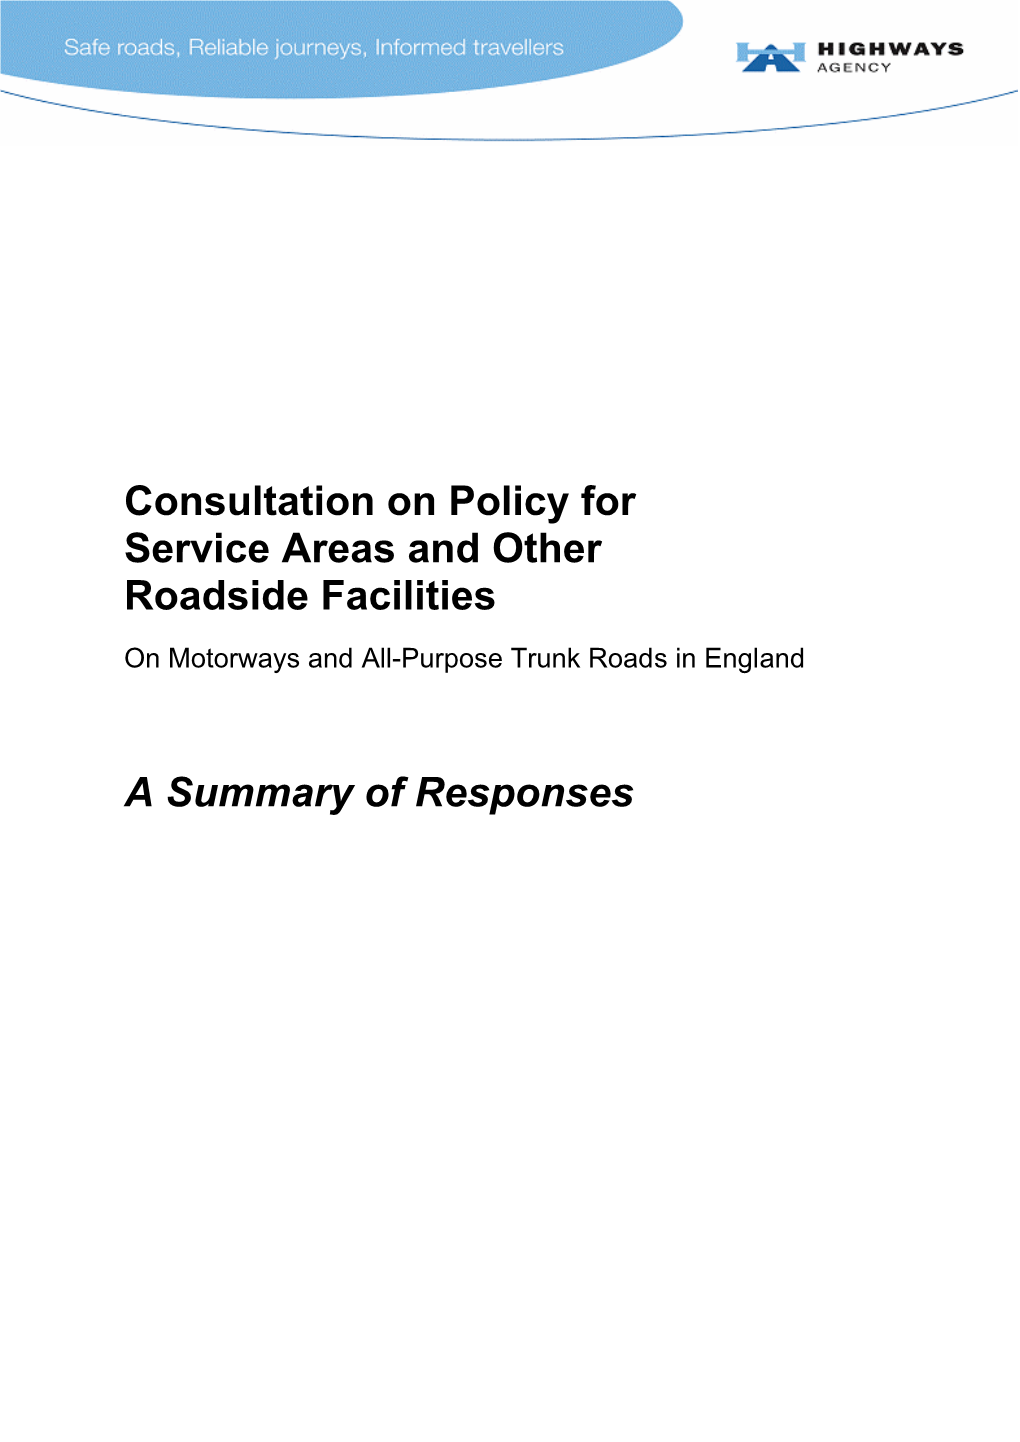 Consultation on Policy for Service Areas and Other Roadside Facilities